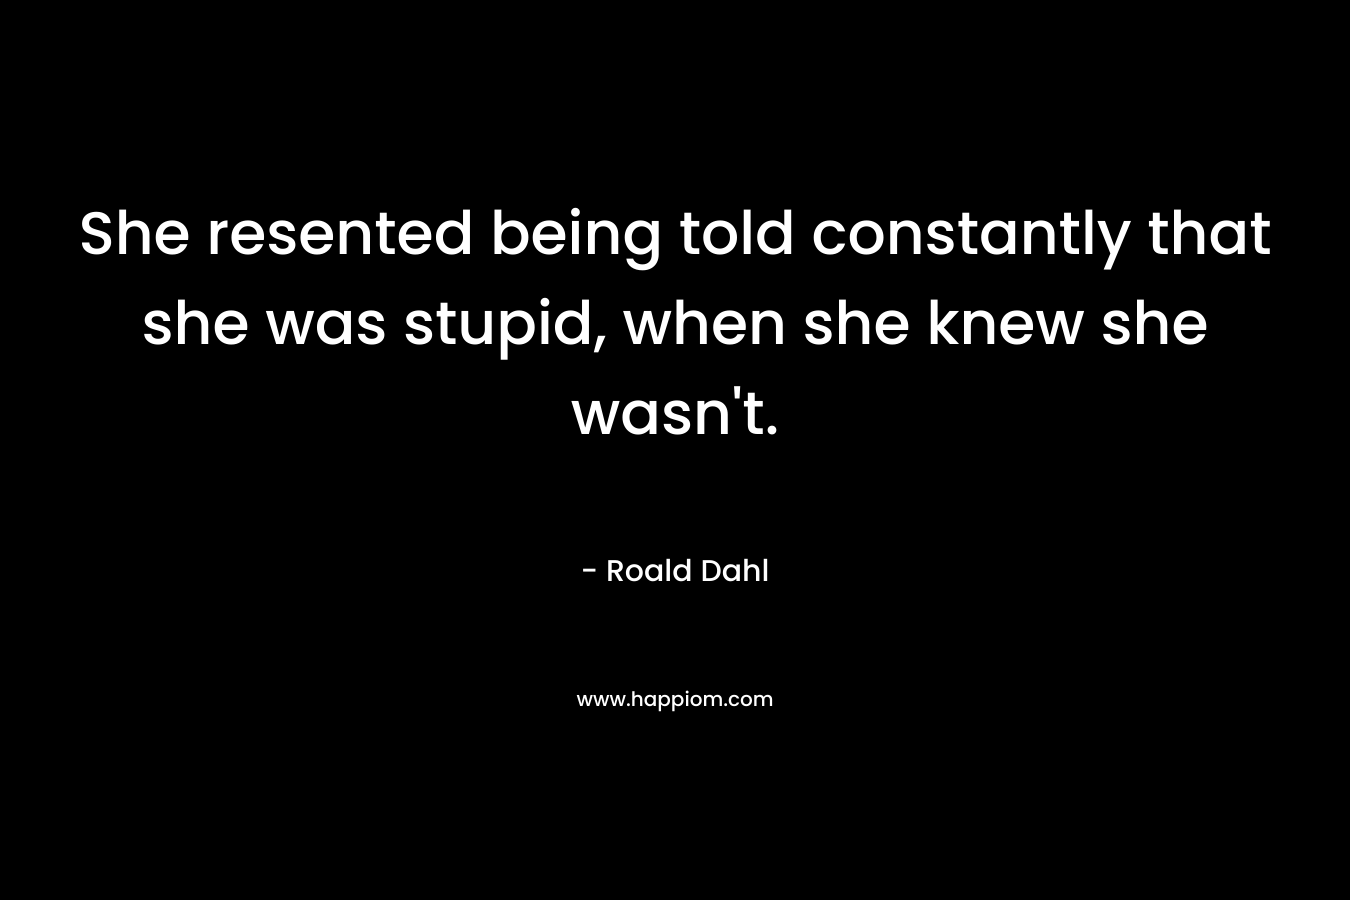 She resented being told constantly that she was stupid, when she knew she wasn’t. – Roald Dahl